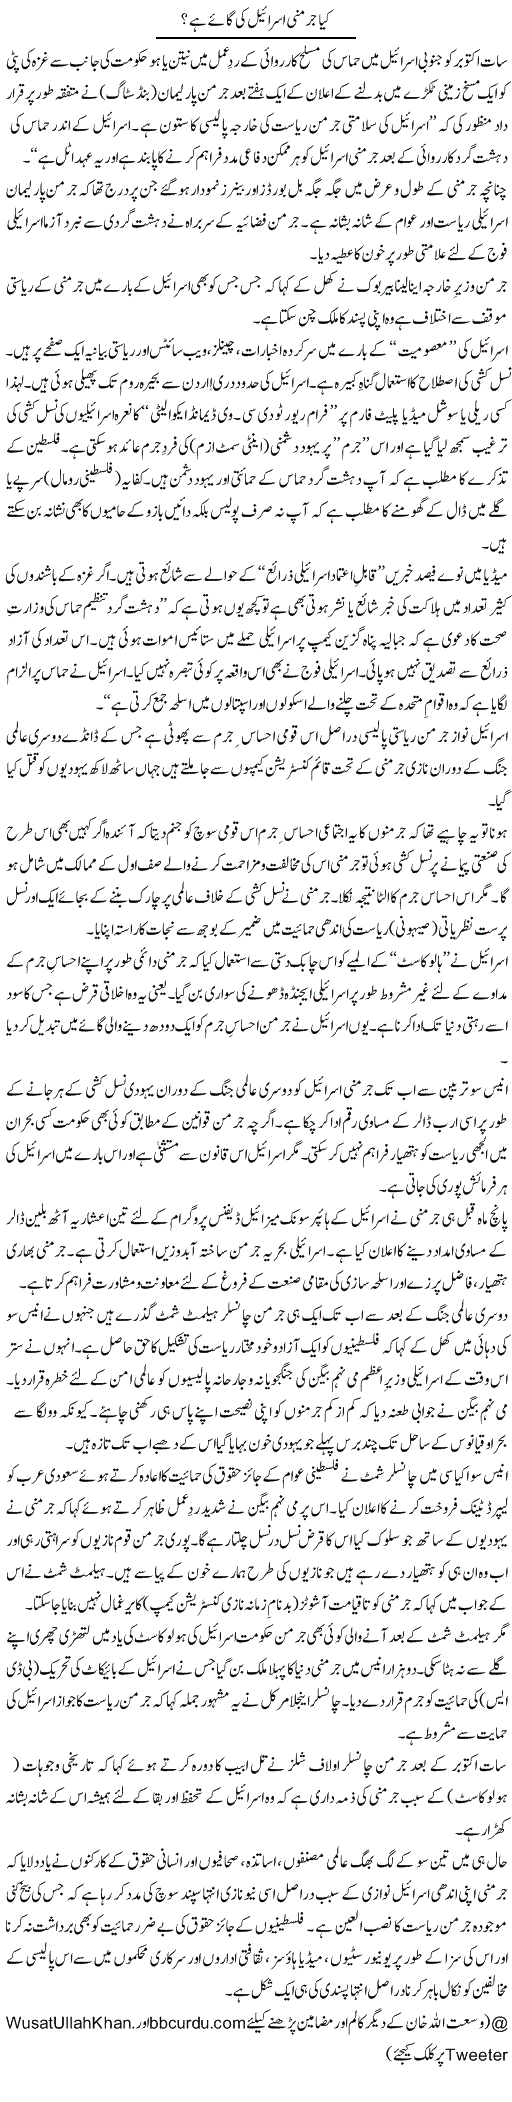 Wasatullah Khan Column About Germany And Israel